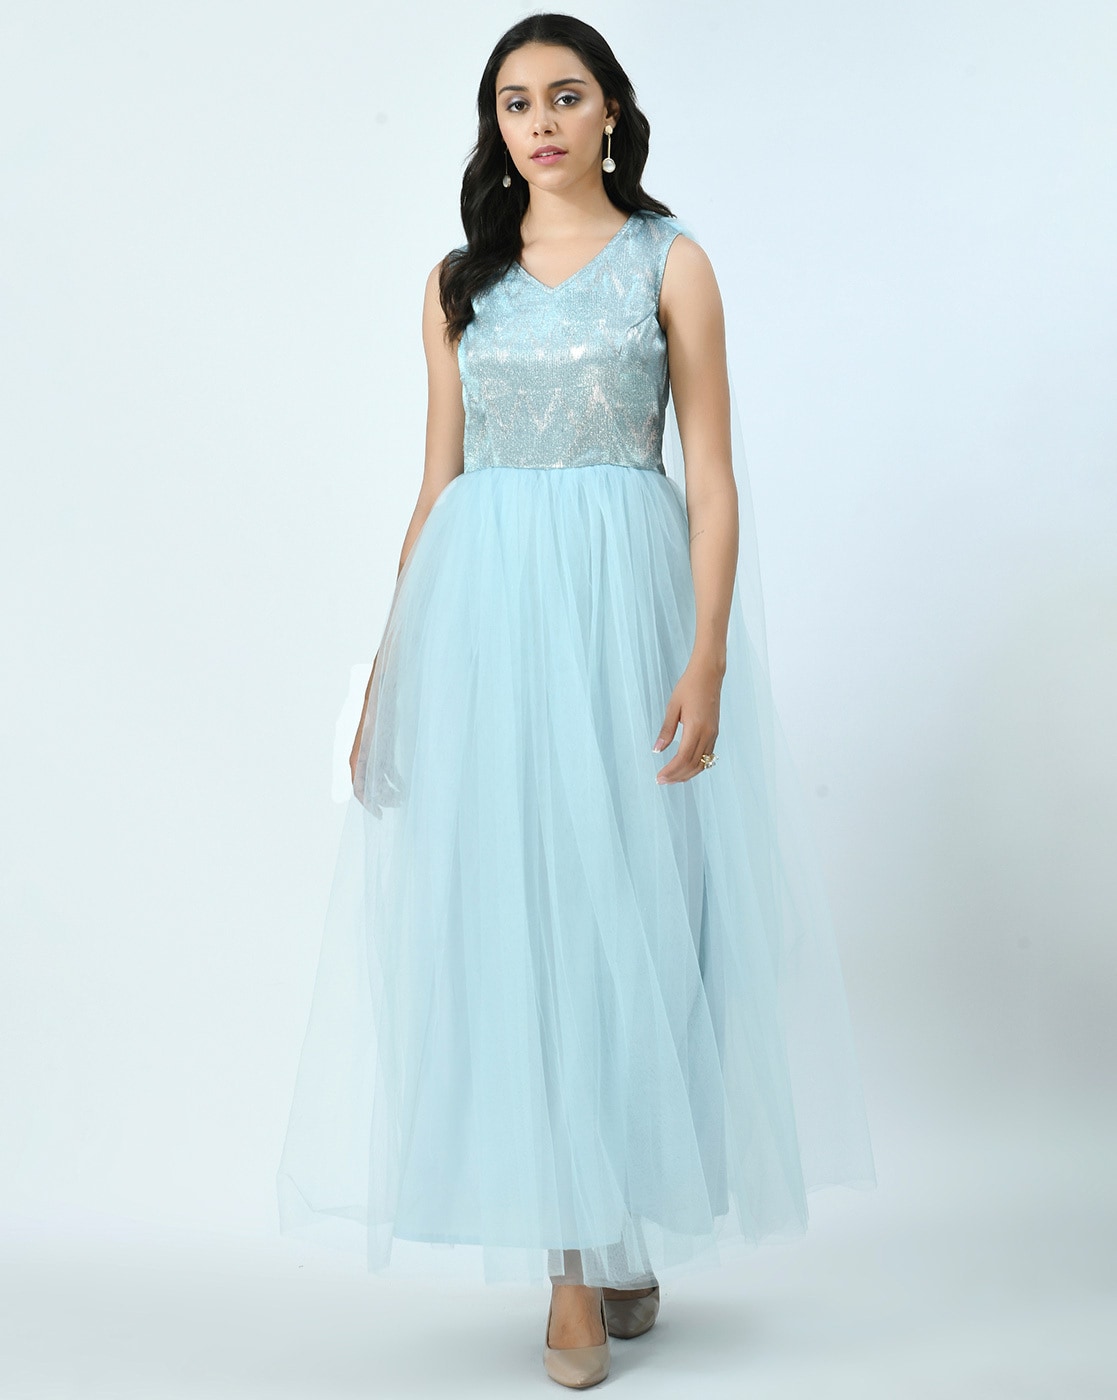 The Amber Gown -Dusty Blue | Lady Black Tie